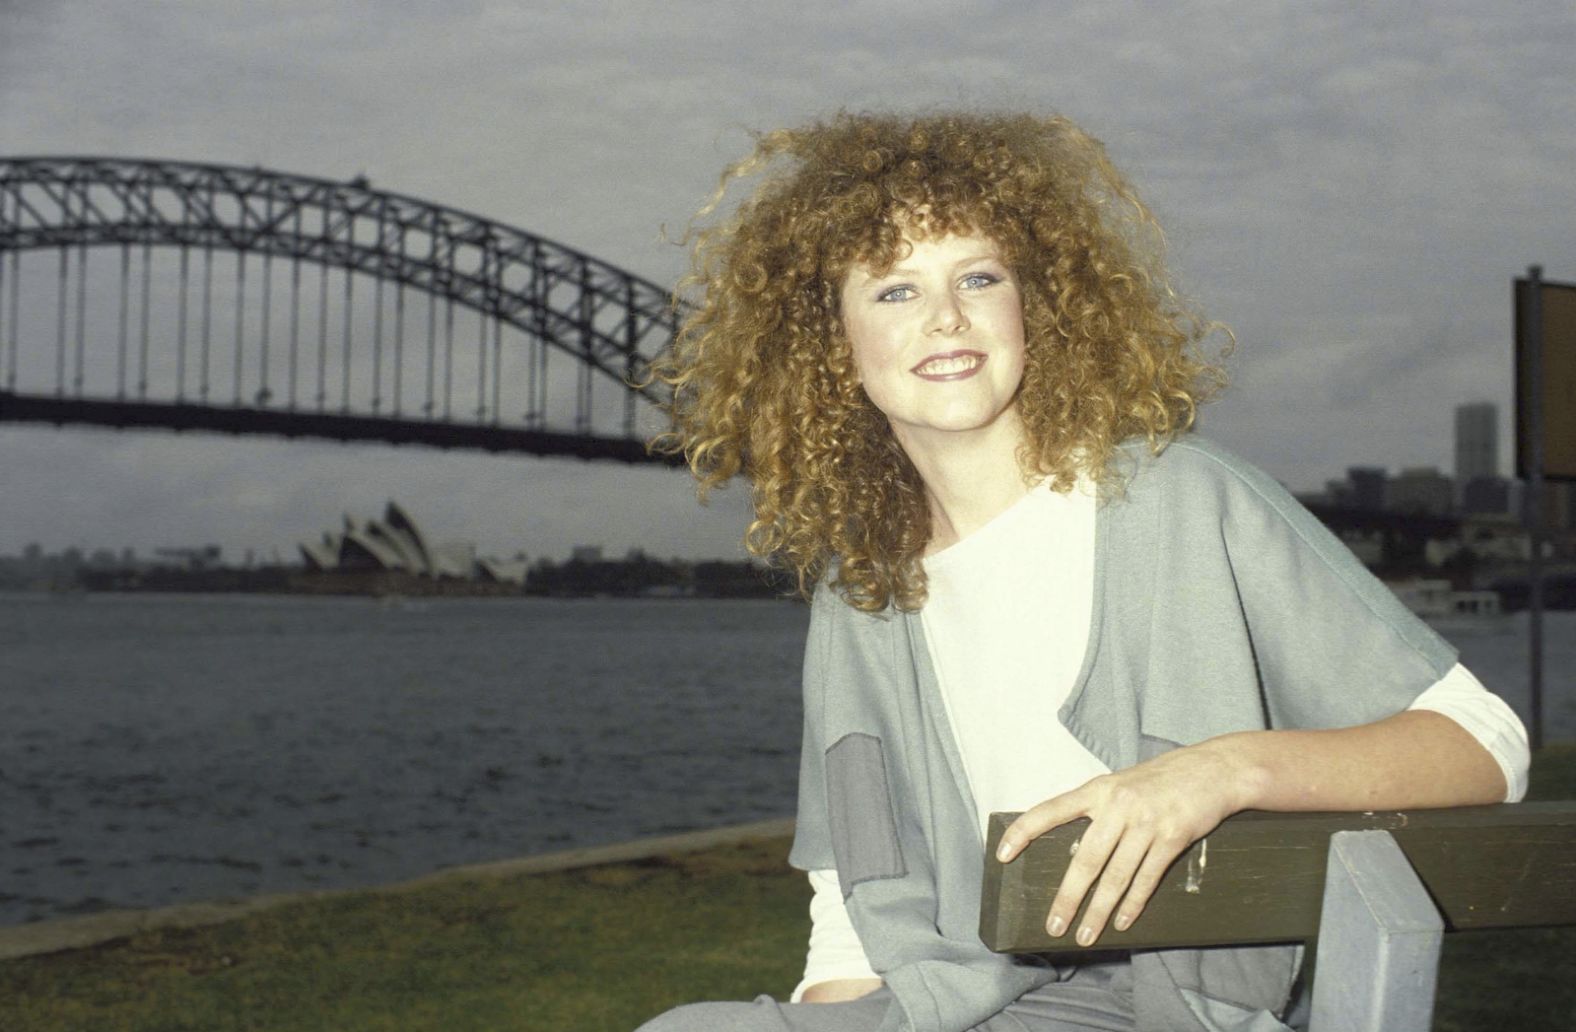 Kidman poses for a photo in Sydney in 1983, as part of the promotion for her first film, "BMX Bandits." She was 16.